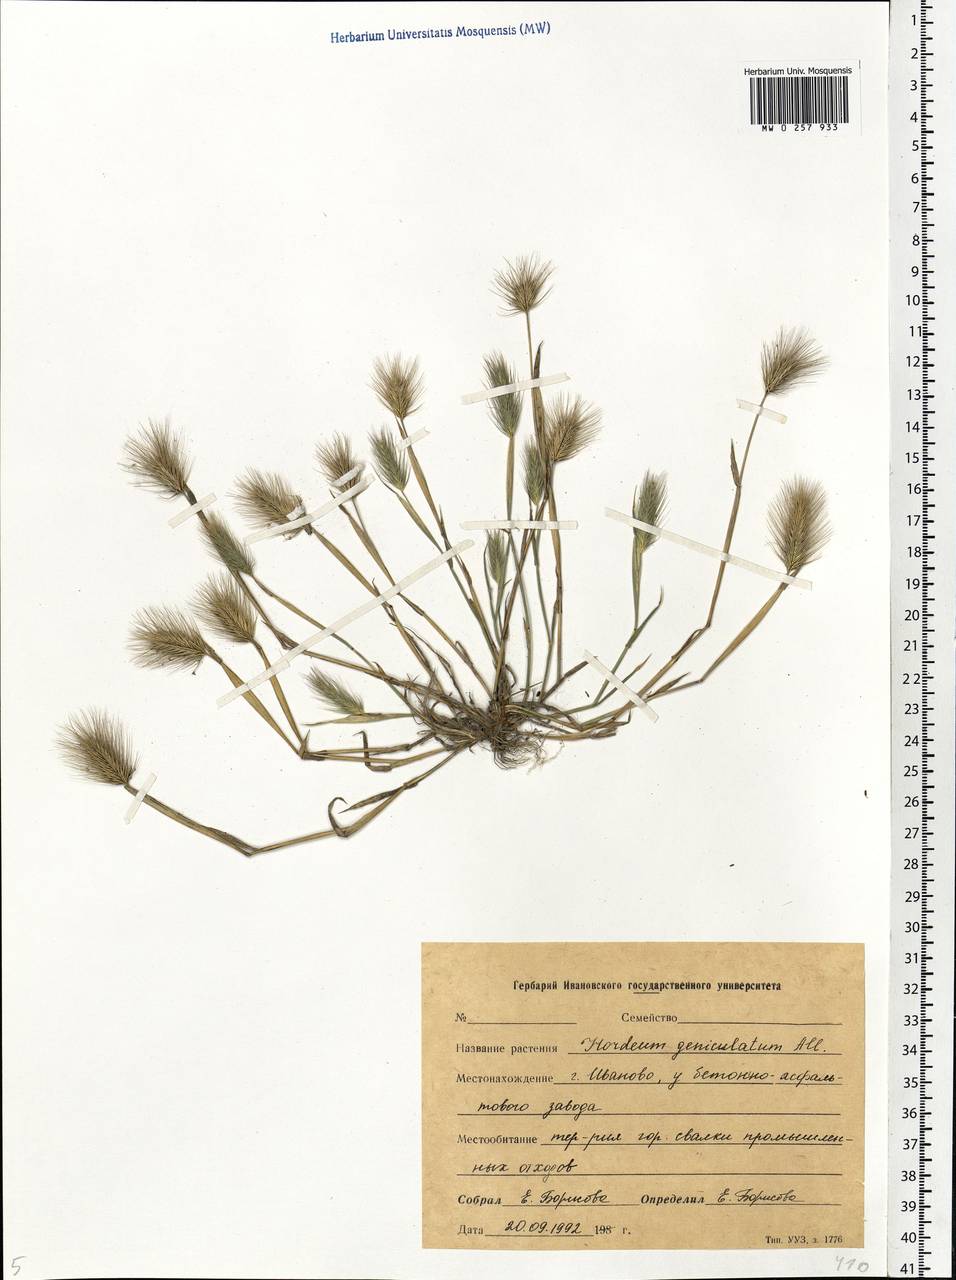 Hordeum marinum subsp. gussoneanum (Parl.) Thell., Eastern Europe, Central forest region (E5) (Russia)